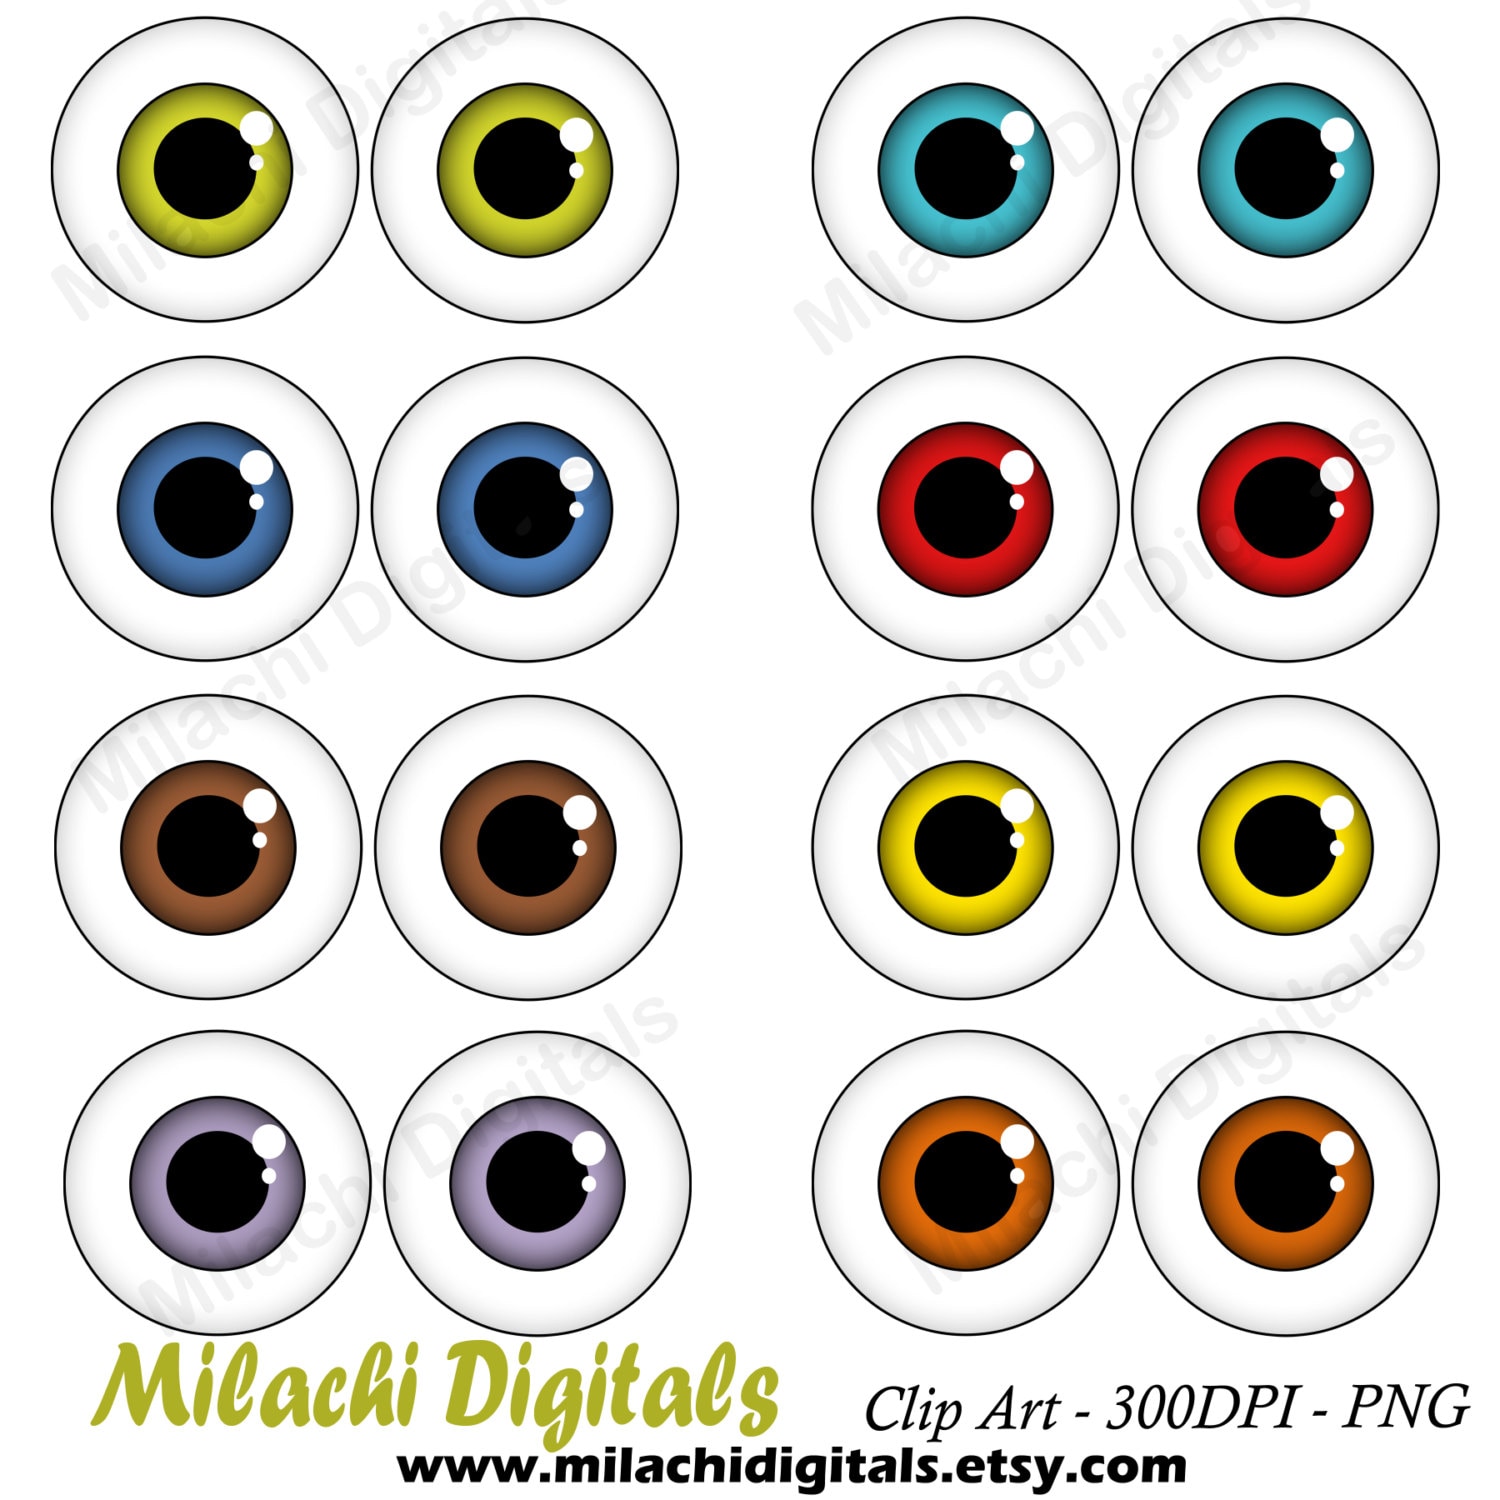 Googly Eyes Vector Art PNG Images